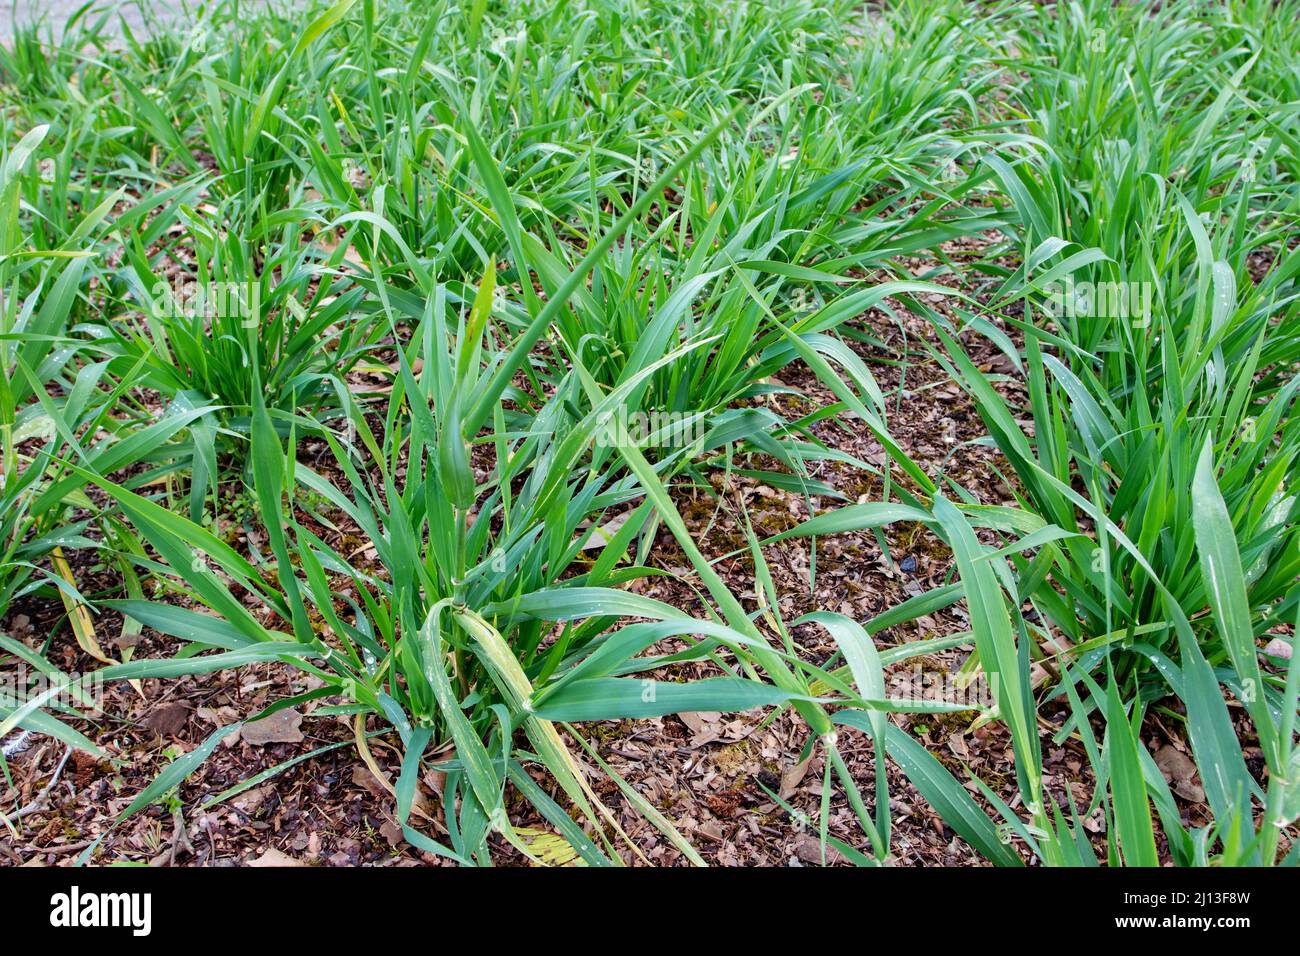 Common barley plants in the tillering stage. Hordeum vulgare. Stock Photo